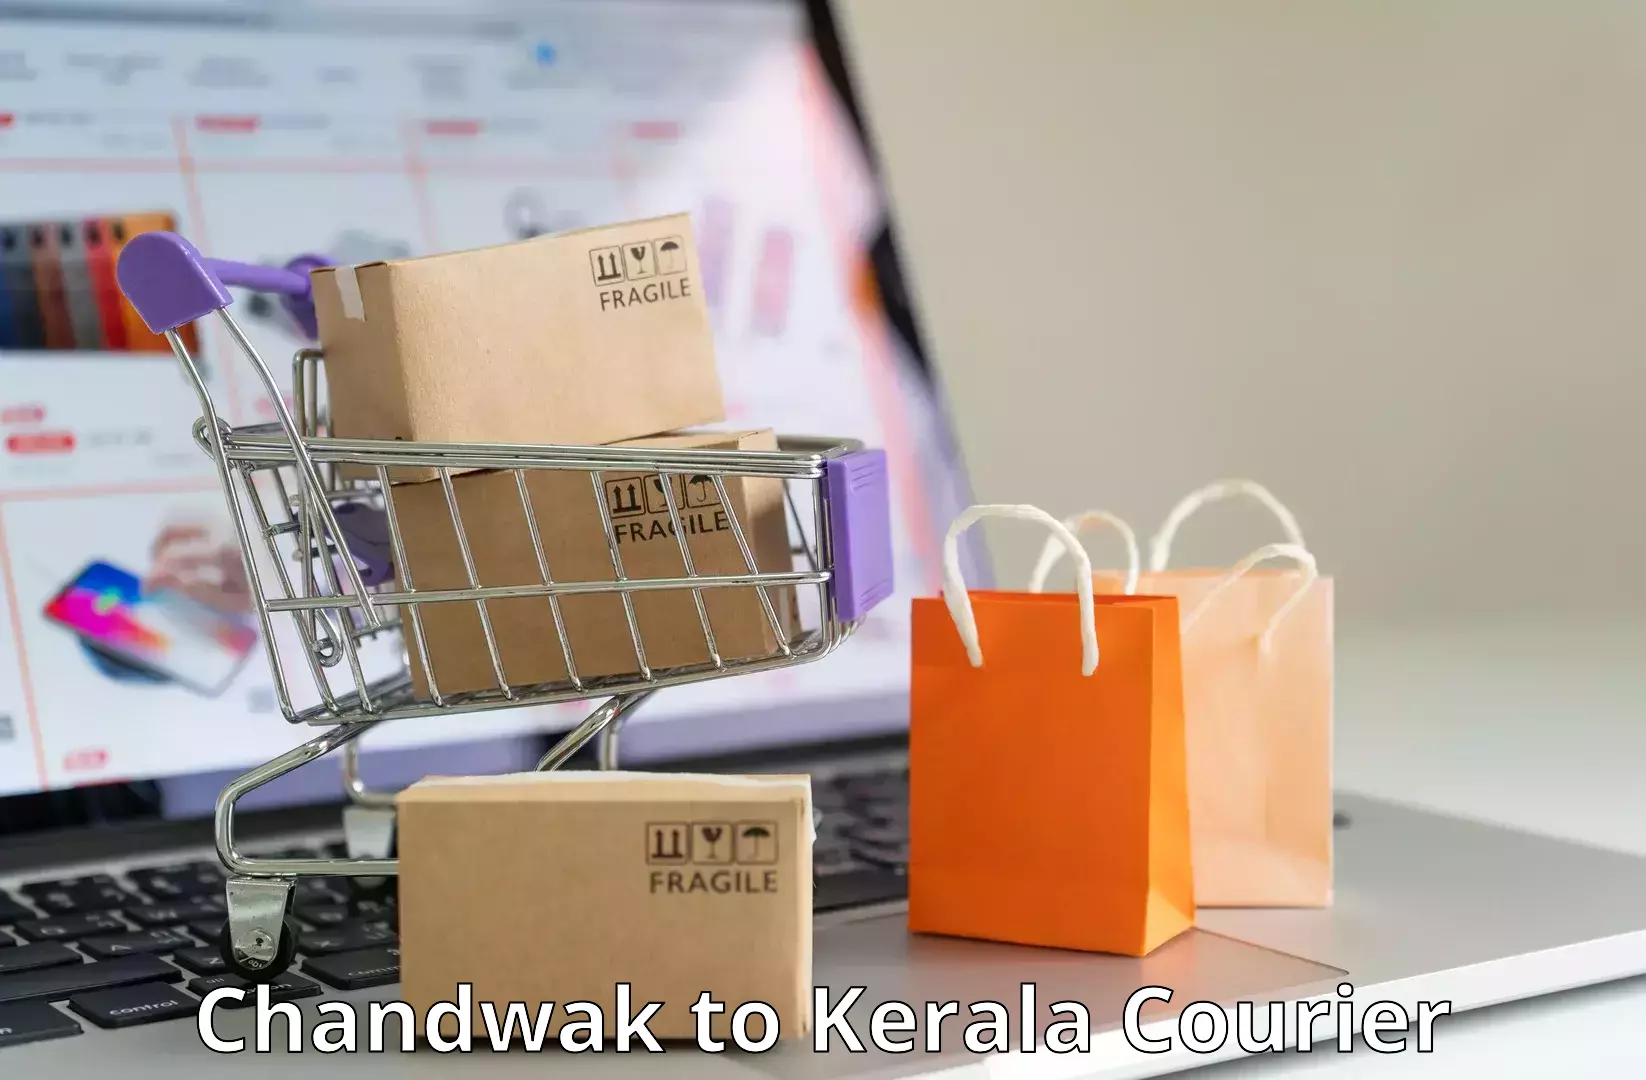 Cargo delivery service Chandwak to Ernakulam